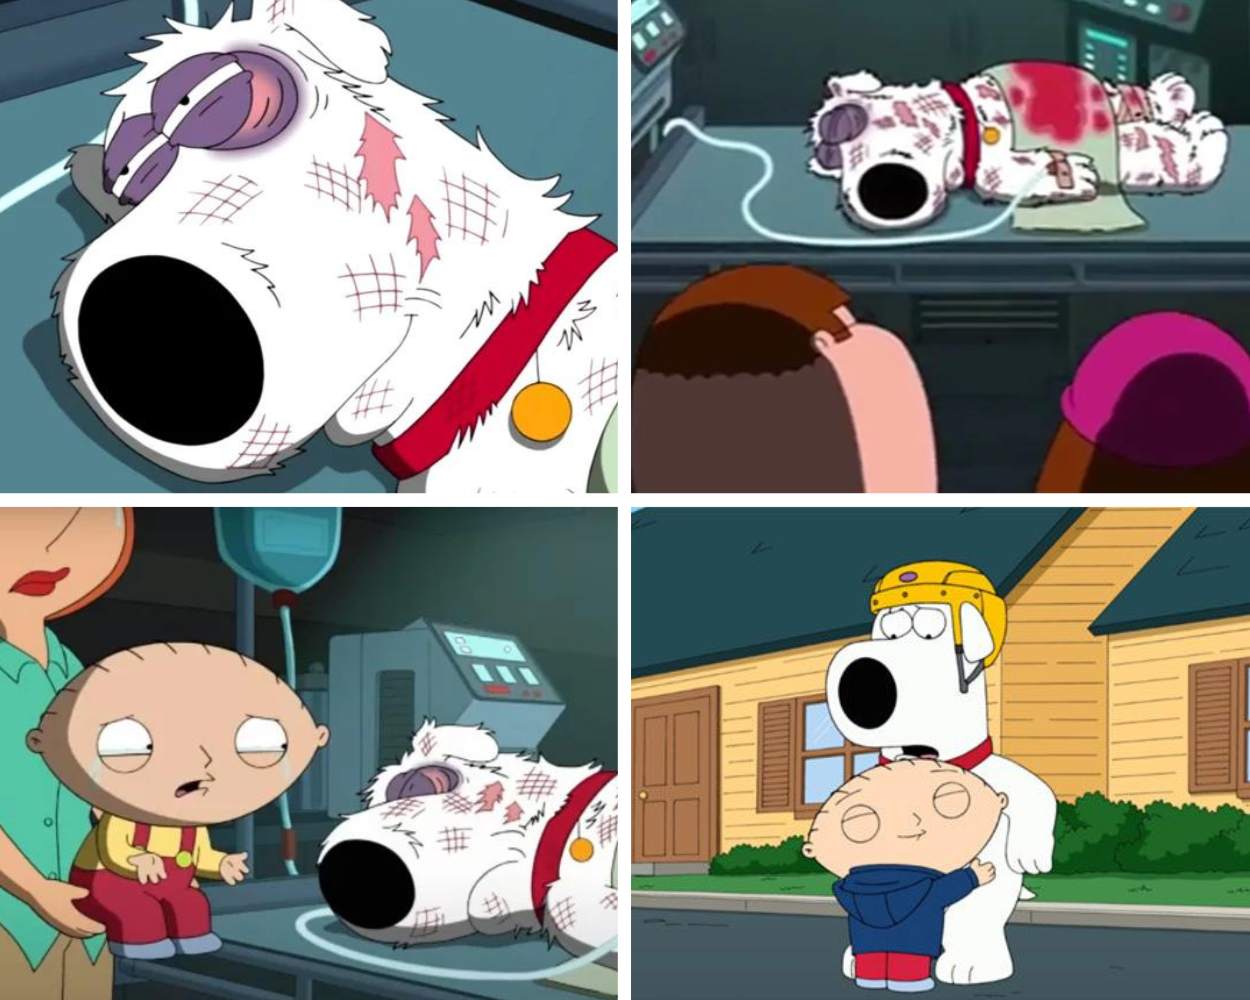 Brian Griffin's Death and Resurrection